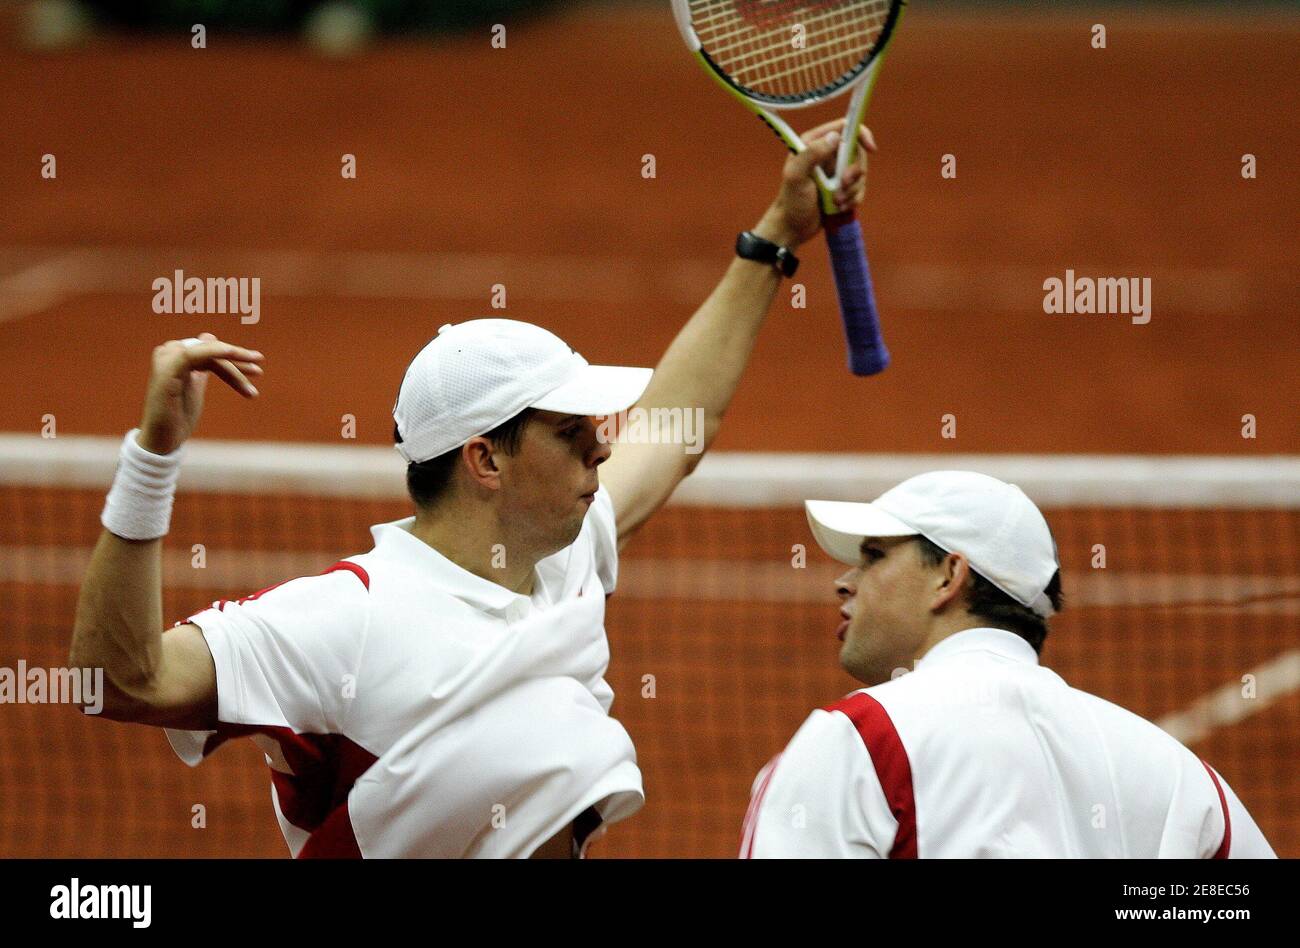 Twin brothers Mike (R) and Bob (L) Bryan of the U.S. celebrate after  winning a game against Belgium's Olivier Rochus and Kristof Vliegen of  Belgium during their Davis Cup World Group Play-offs